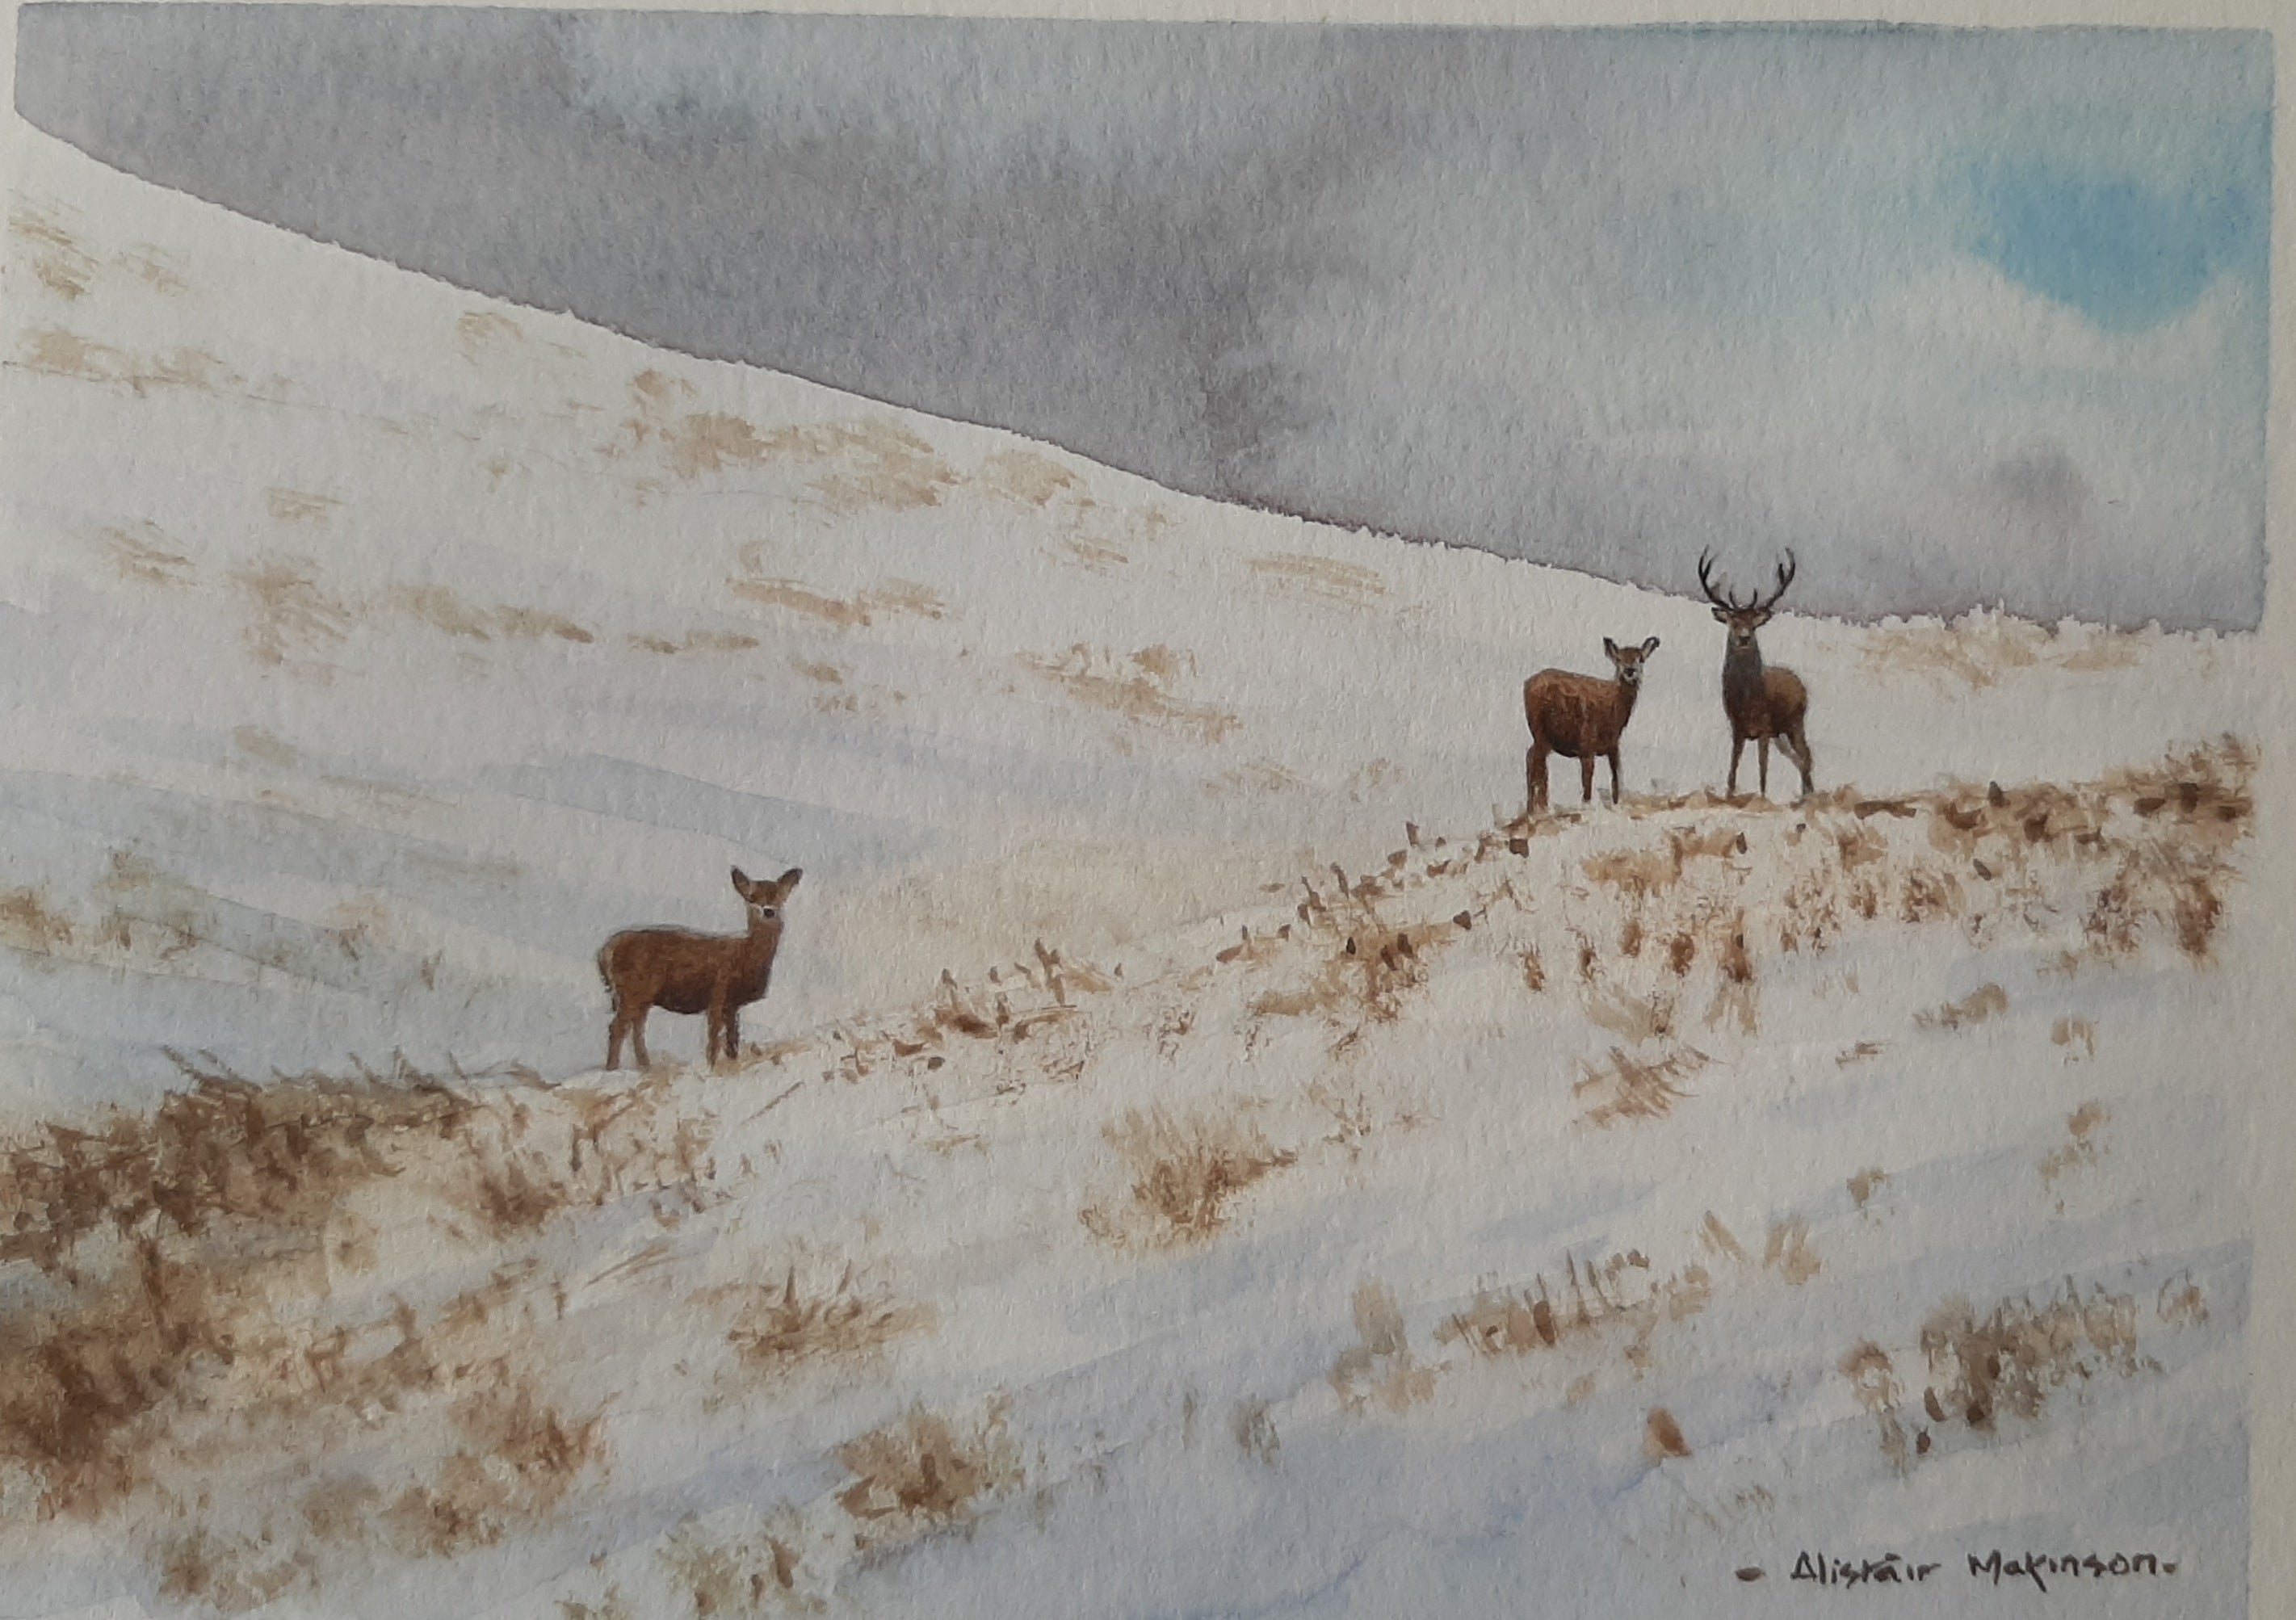 'Red Deer in the Snow' - Original Watercolour Painting by Alistair Makinson - 16 x 11.5cm